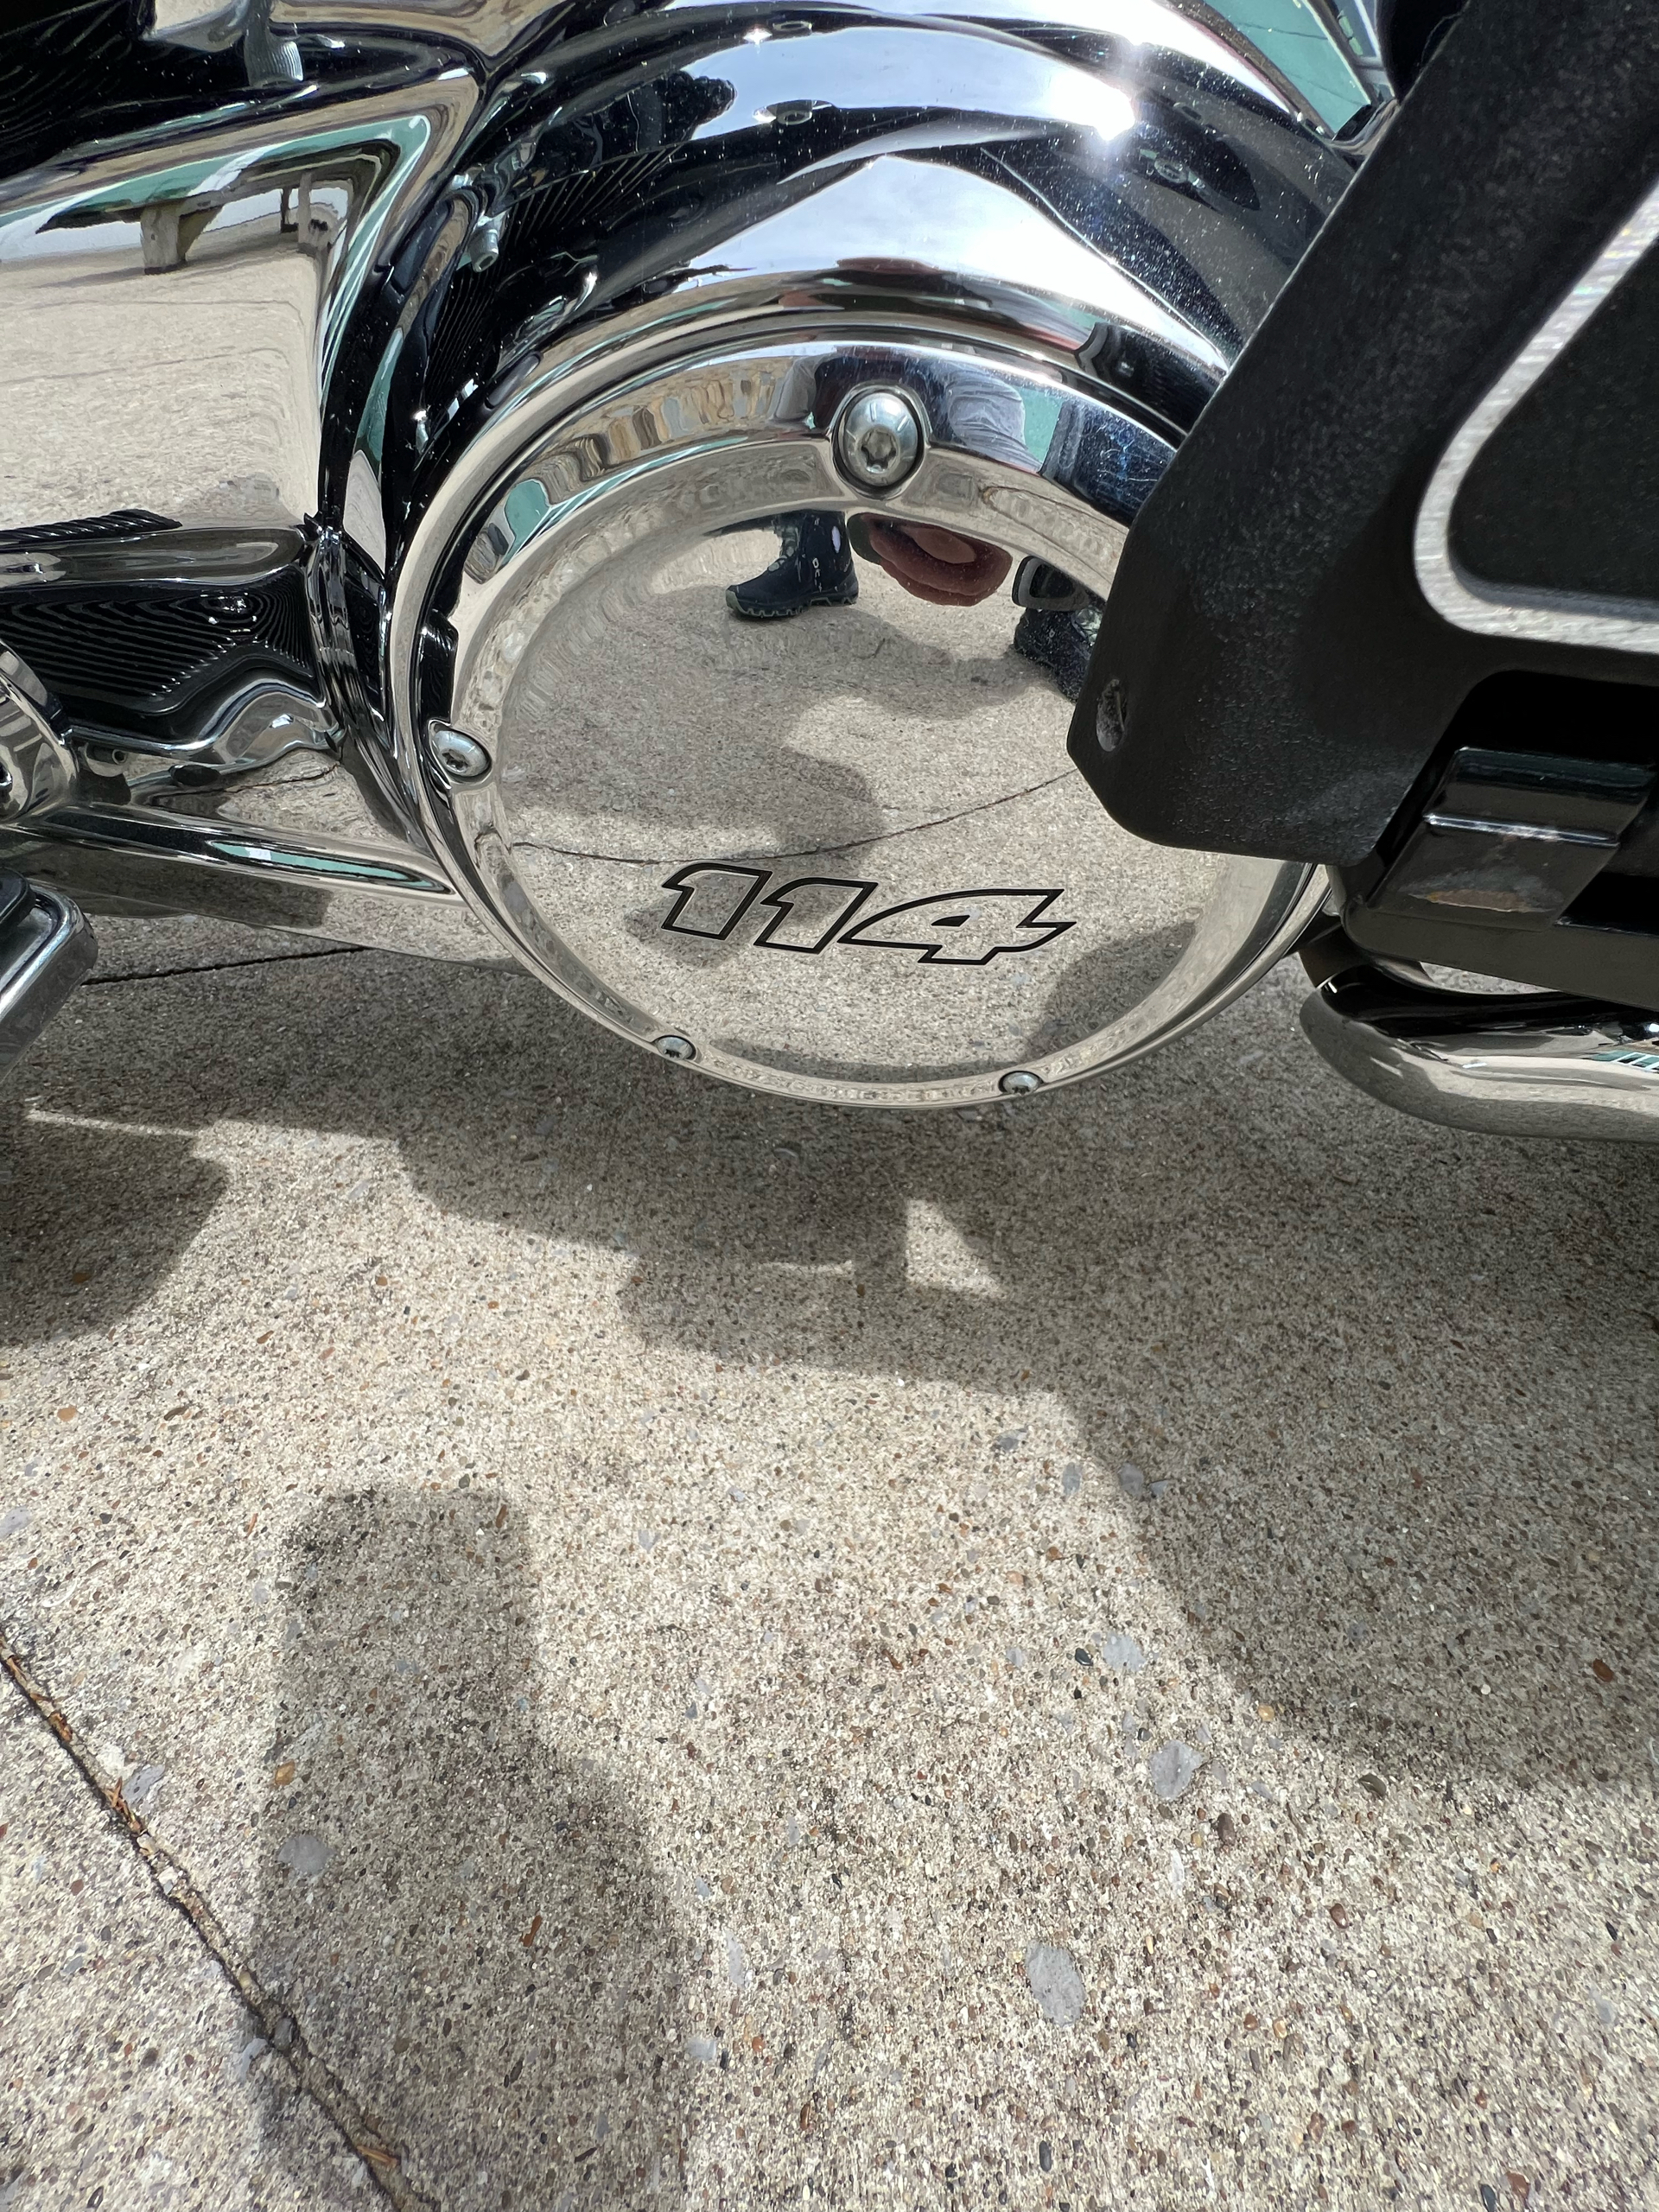 2019 Harley-Davidson FLHTK Ultra Limited in Columbia, Tennessee - Photo 8